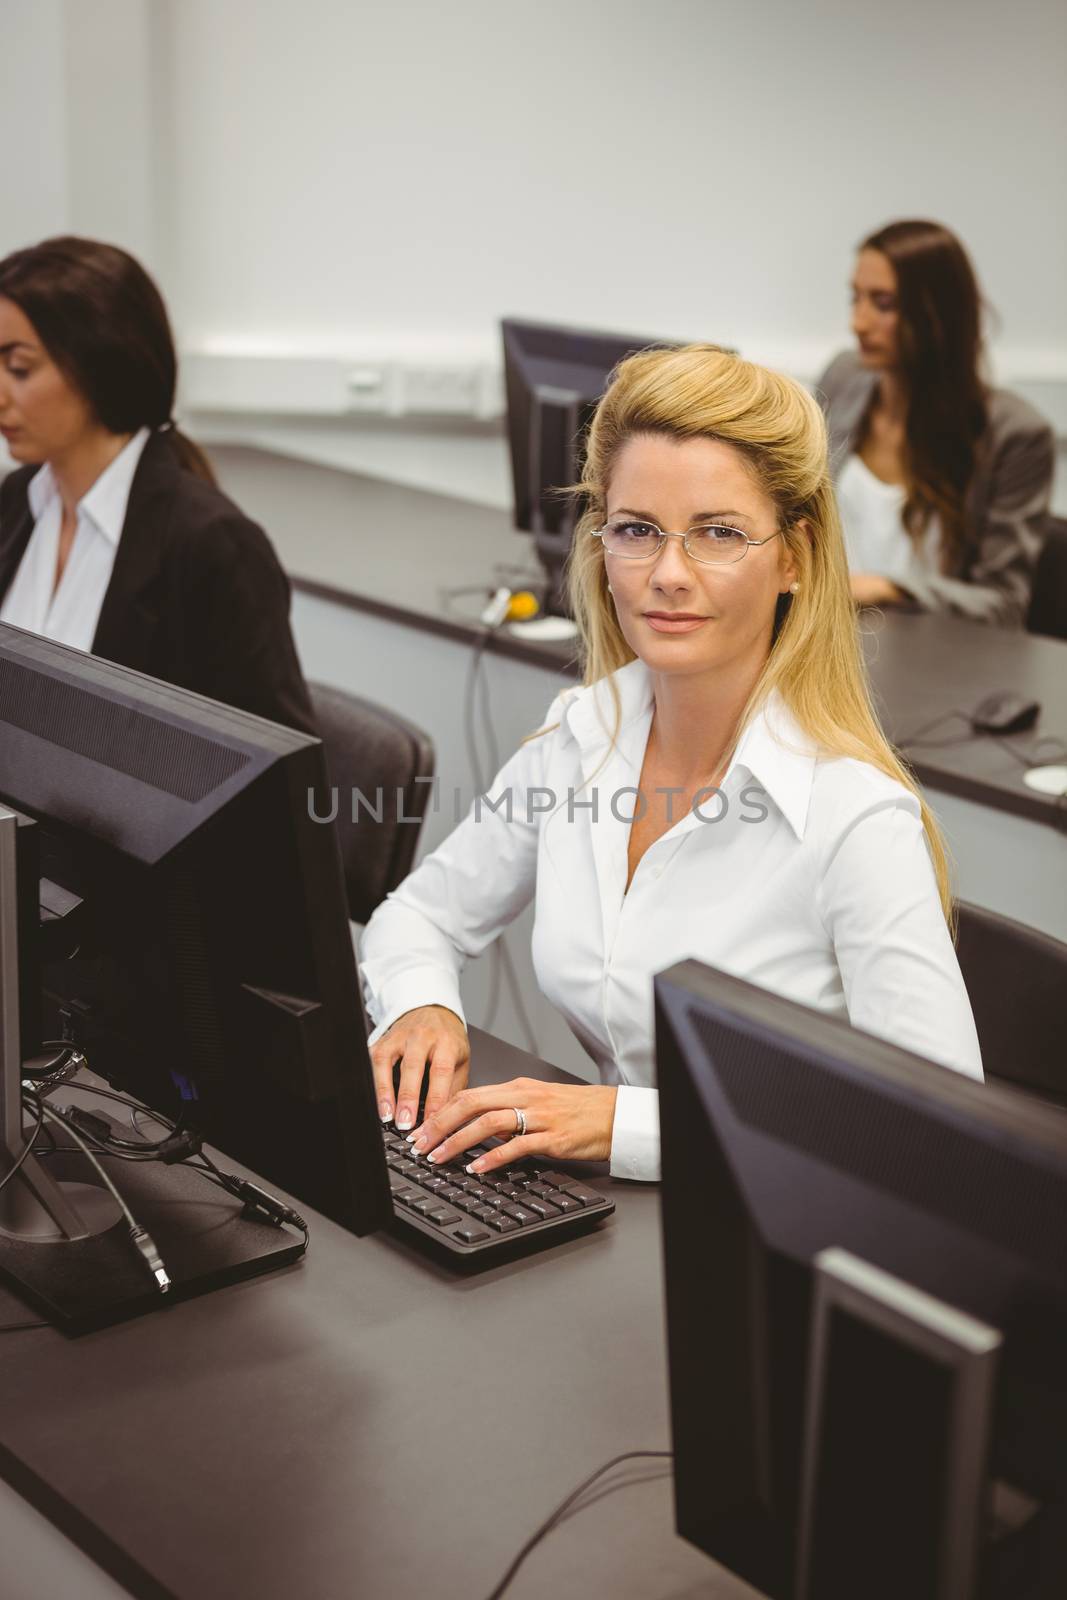 Smiling businesswoman working in computer room by Wavebreakmedia